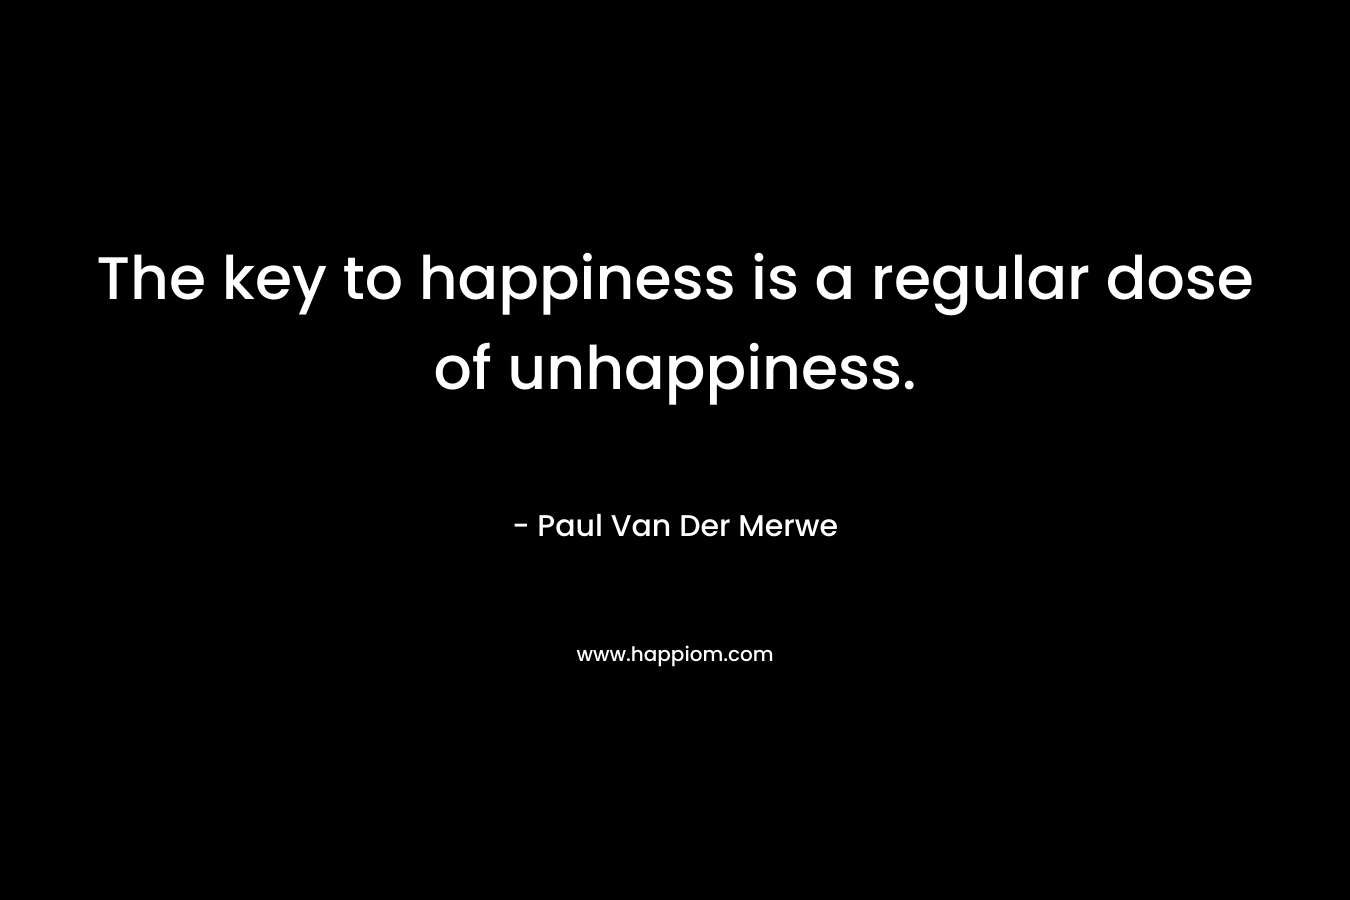 The key to happiness is a regular dose of unhappiness. – Paul Van Der Merwe